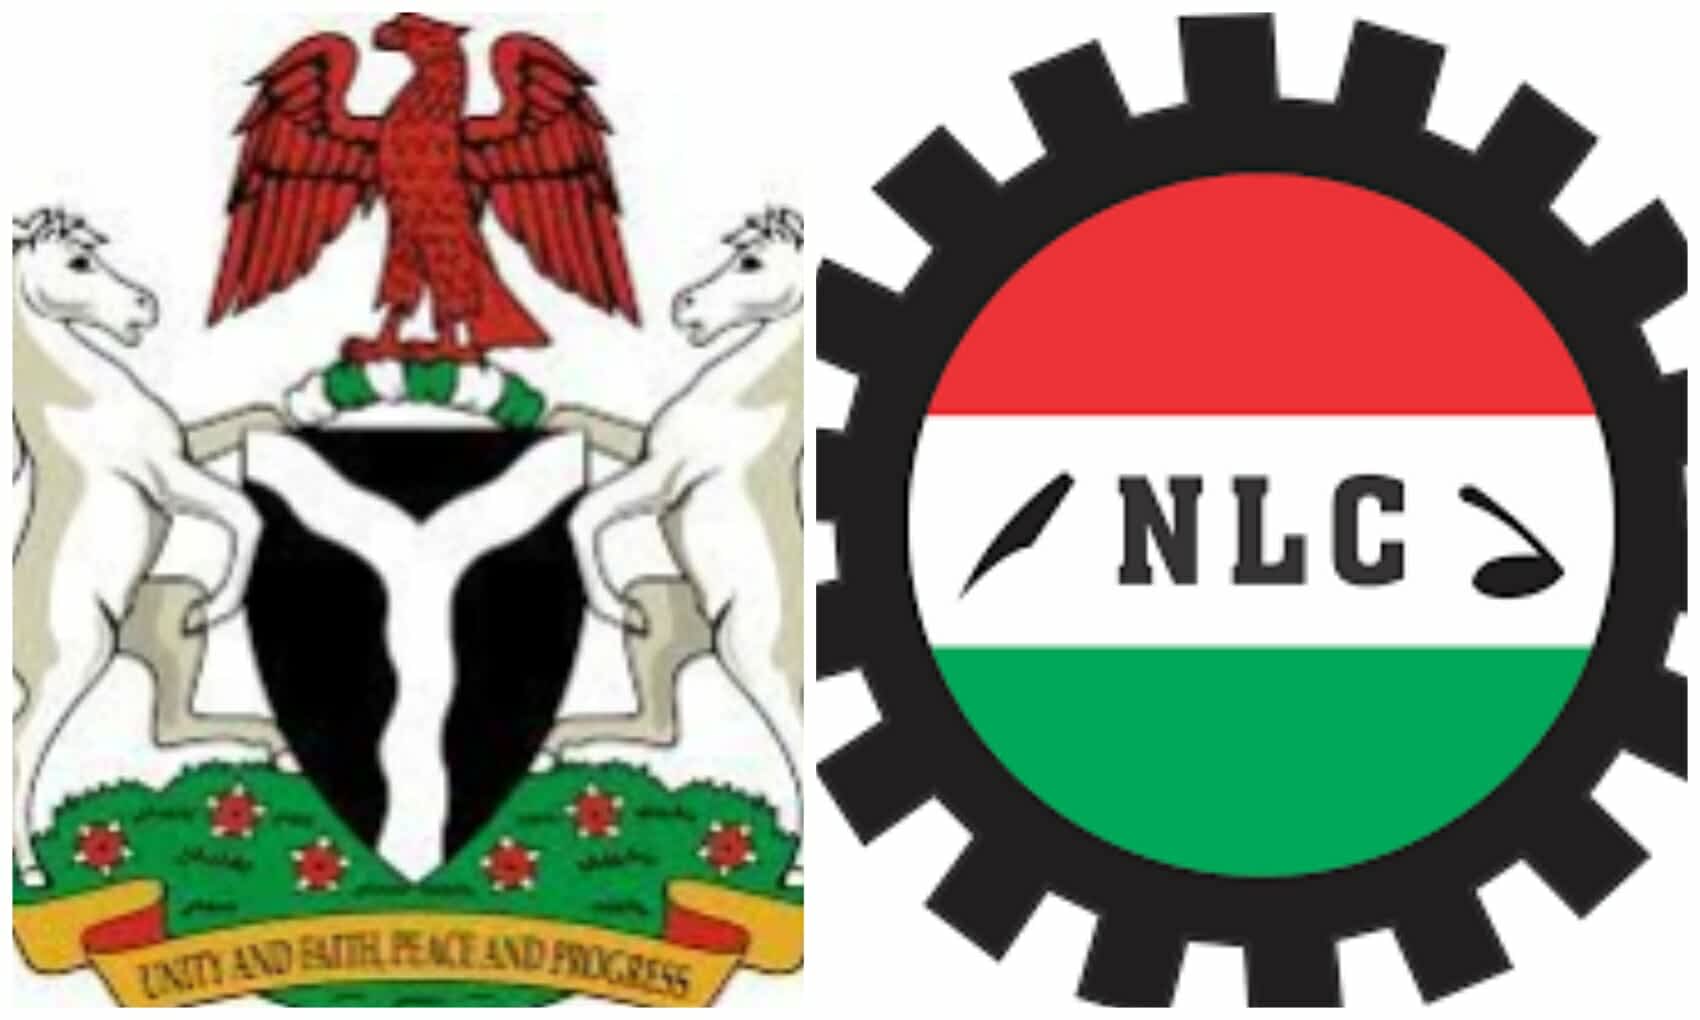 Resolutions from FG's meeting with NLC, TUC on Sunday revealed